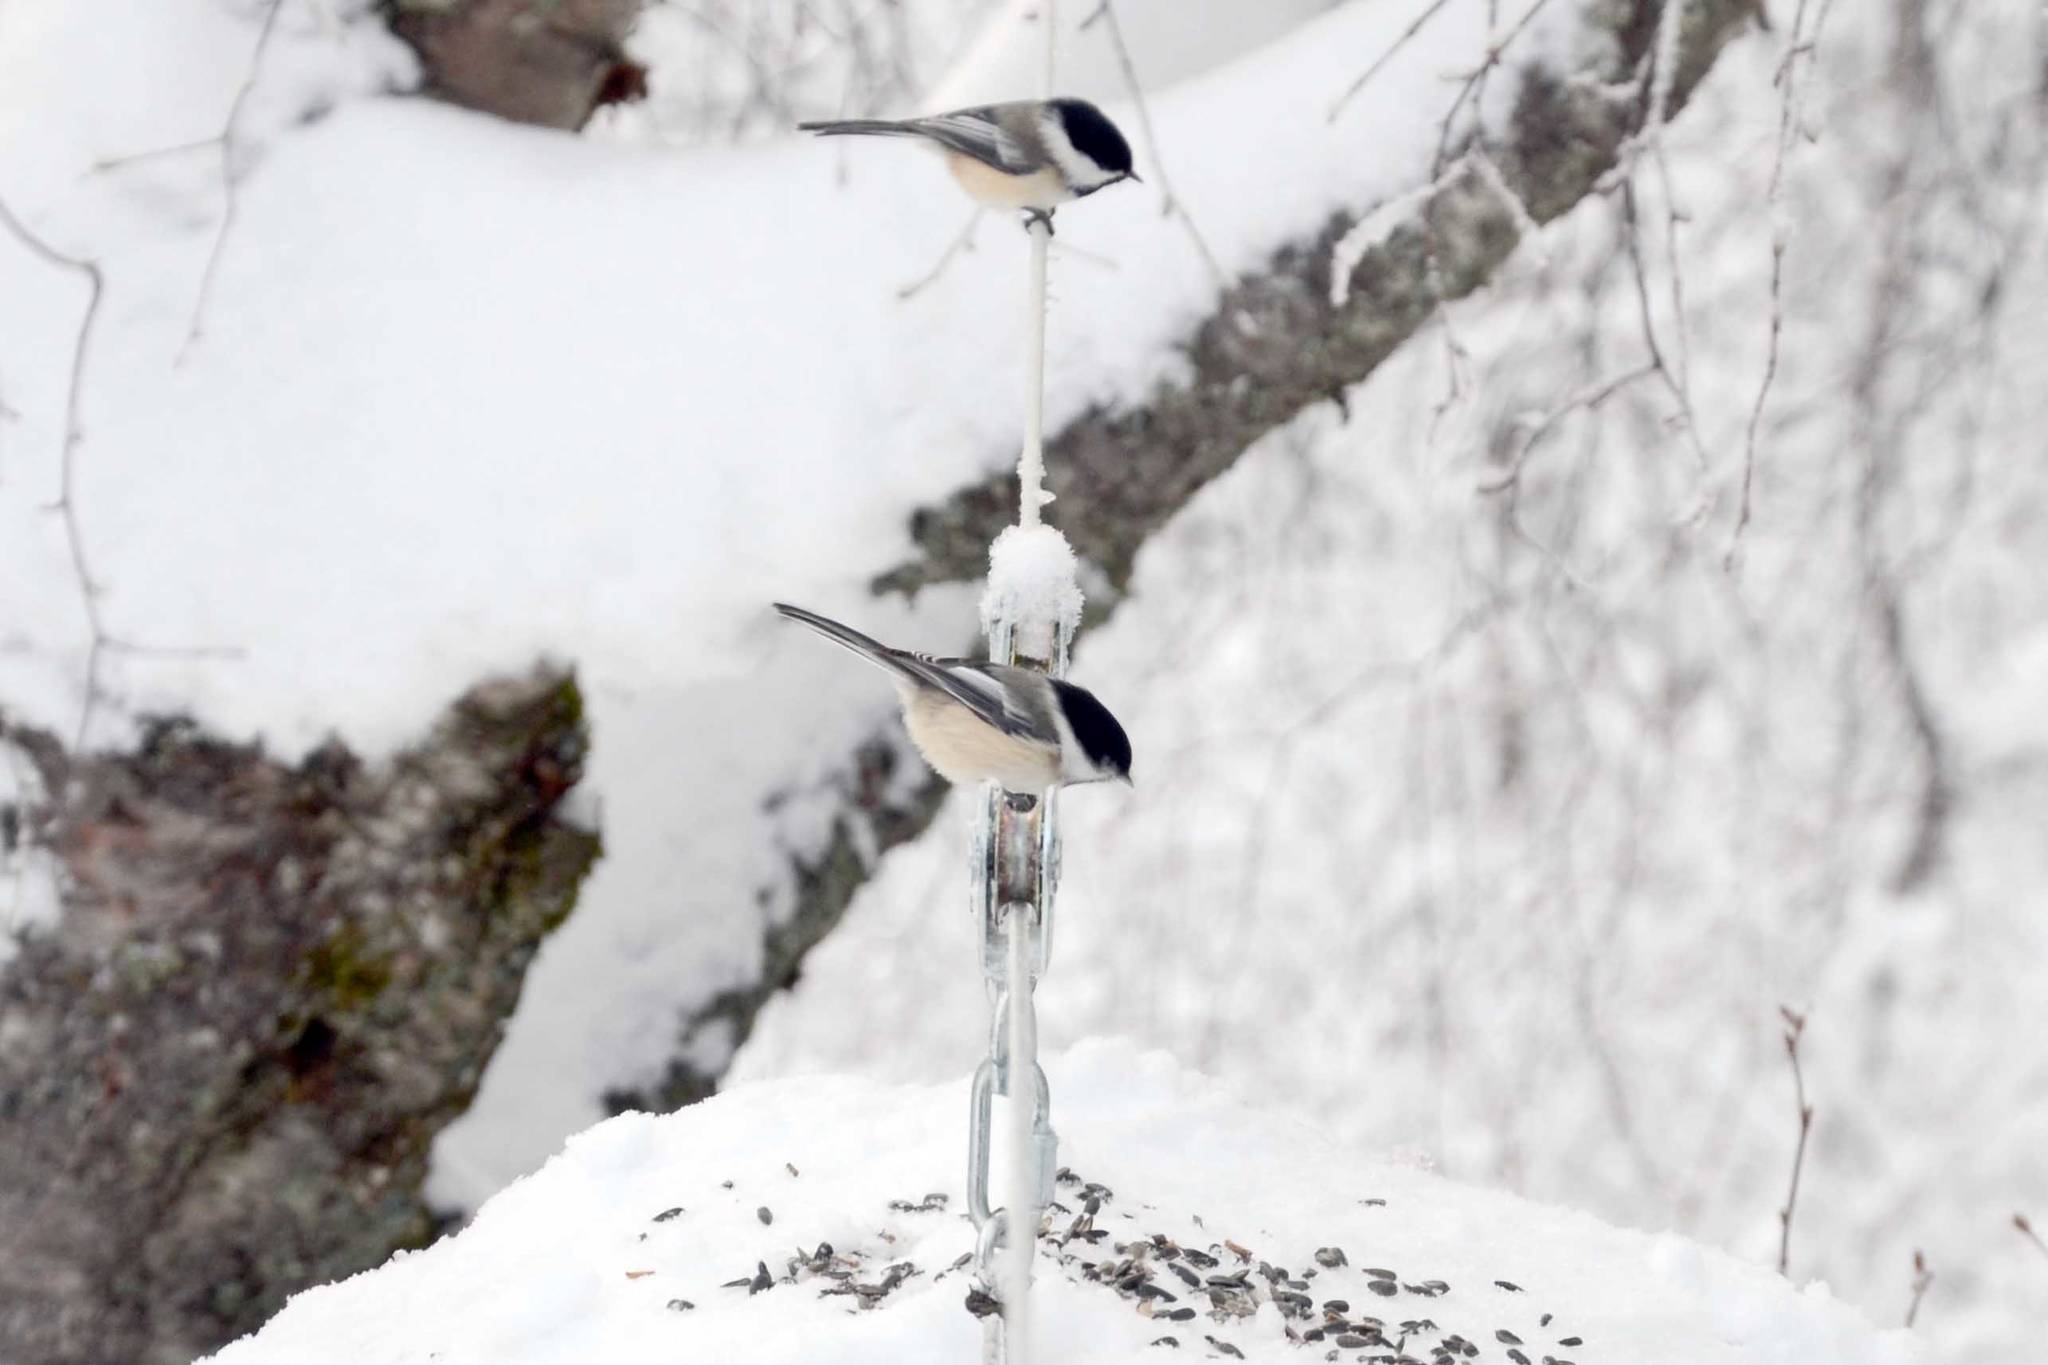 Refuge Notebook: To feed or not to feed the birds